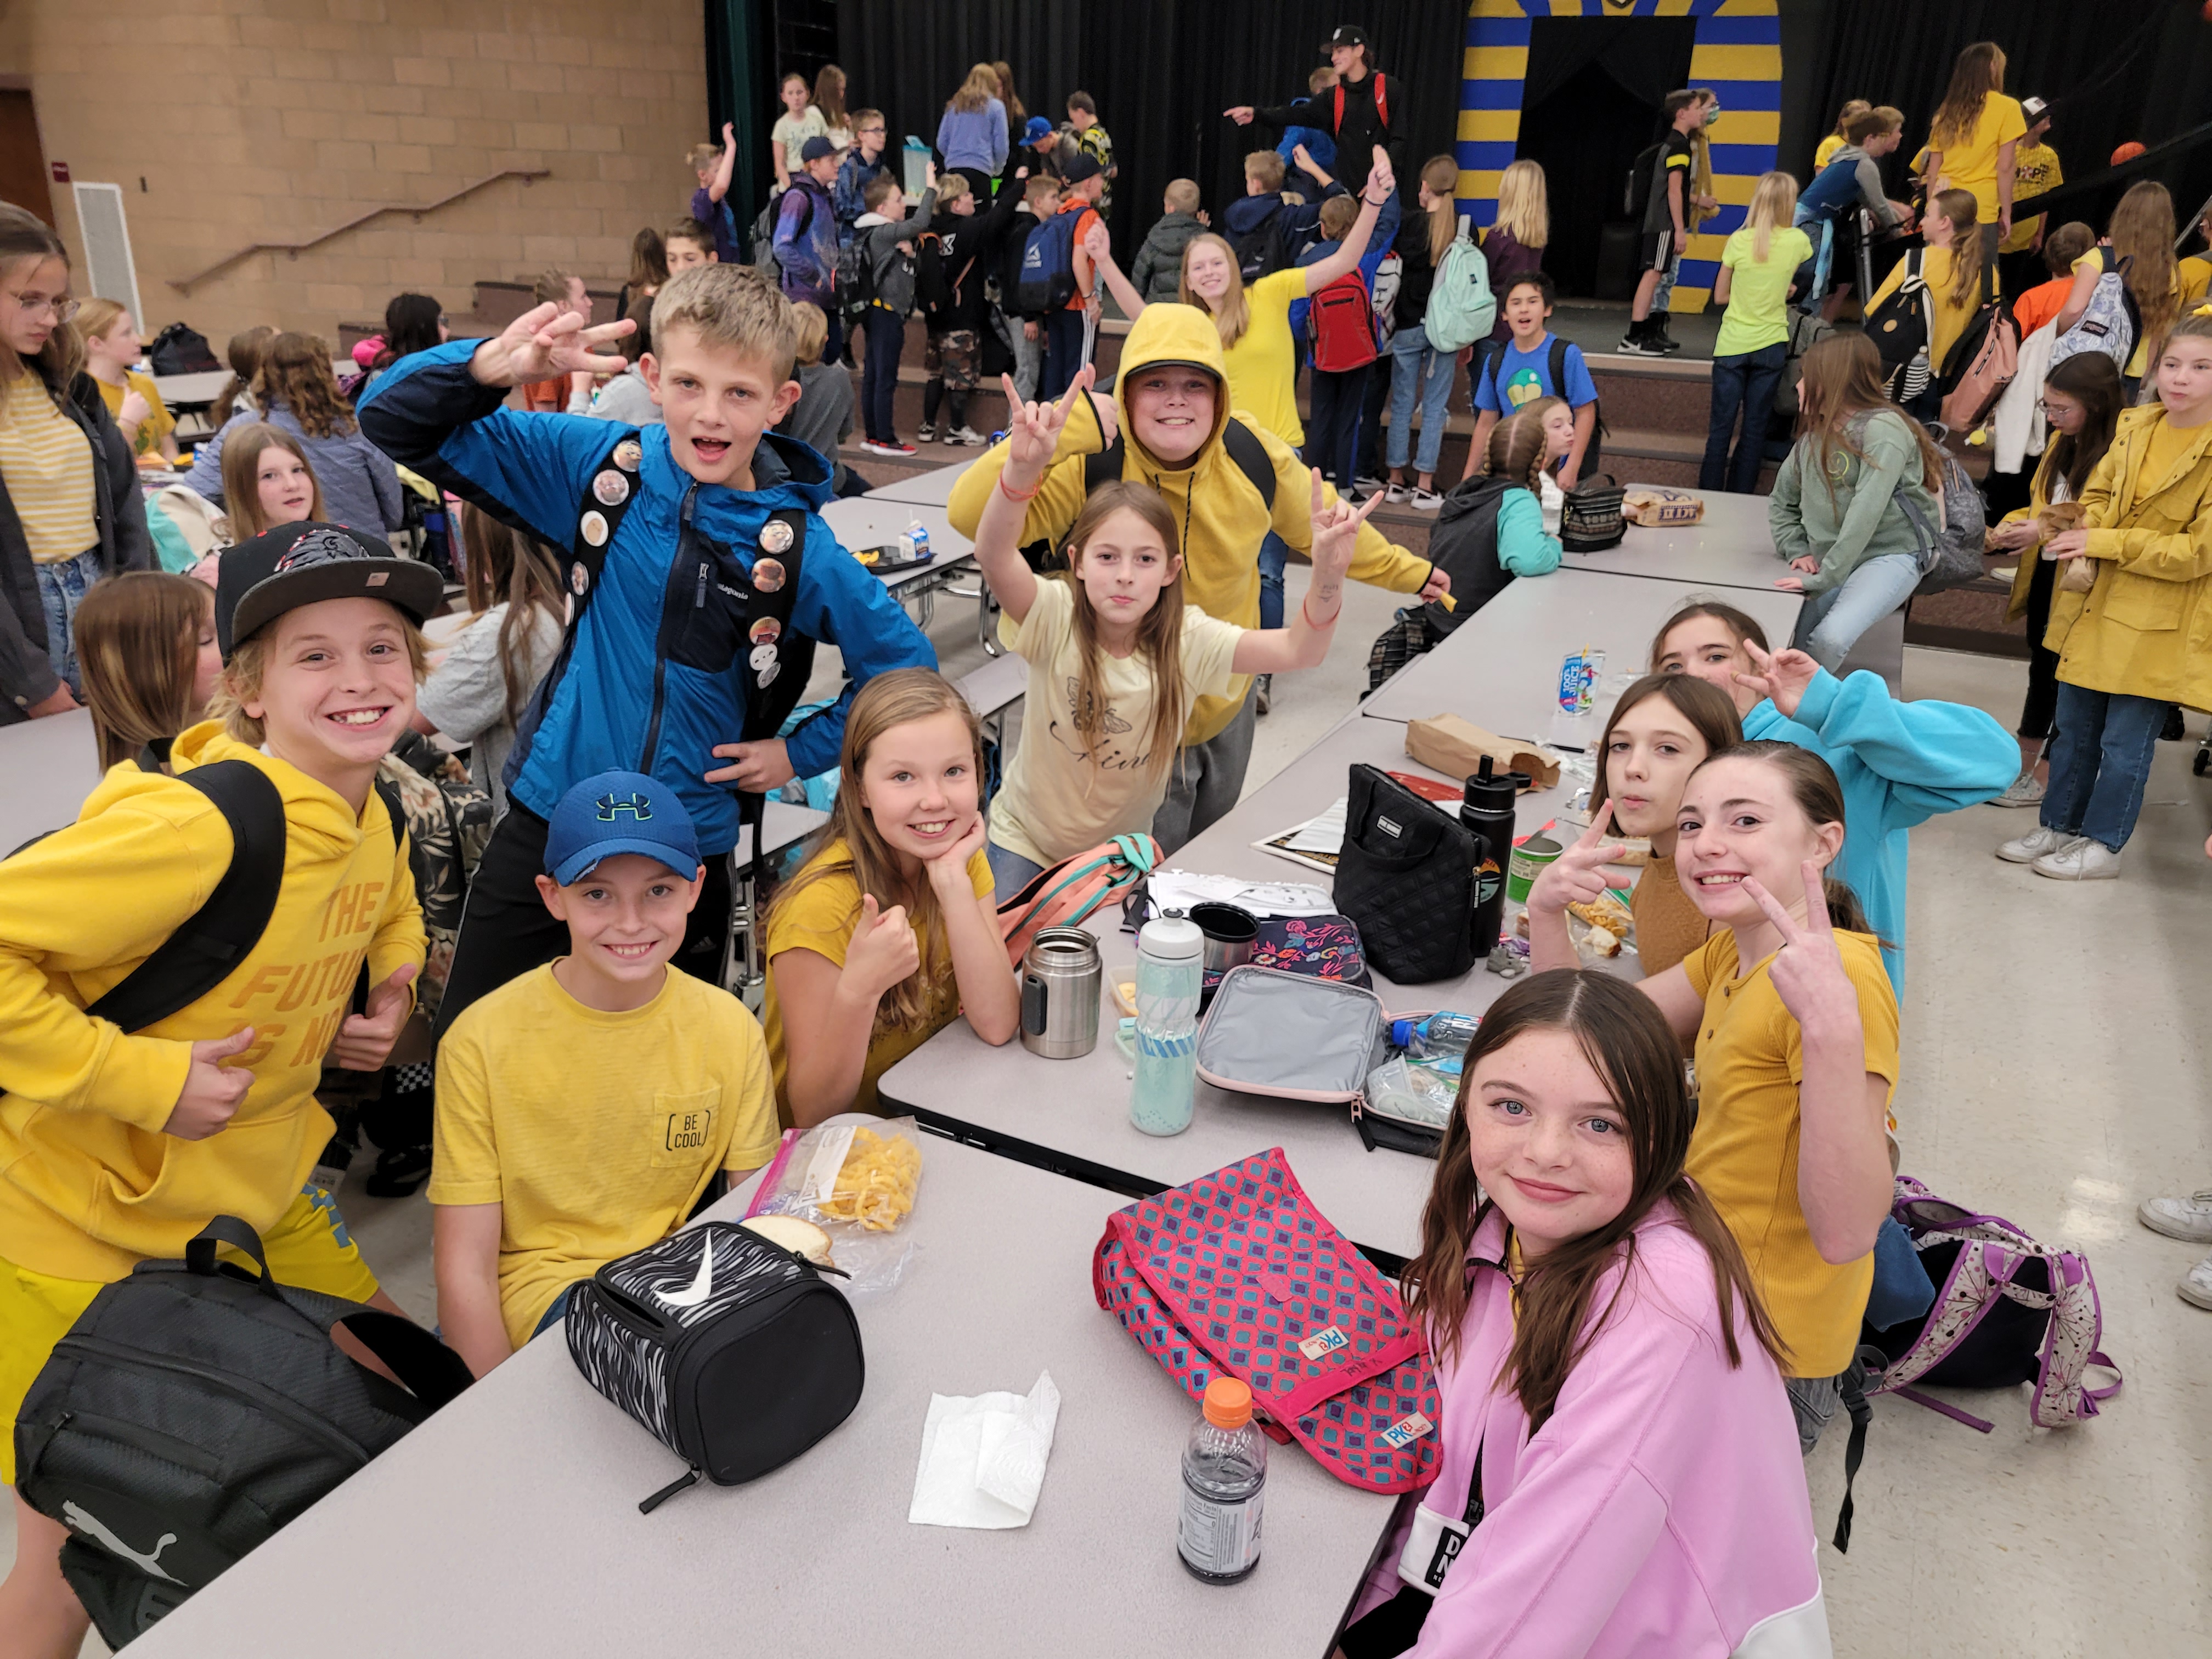 Students wear yellow to represent hope